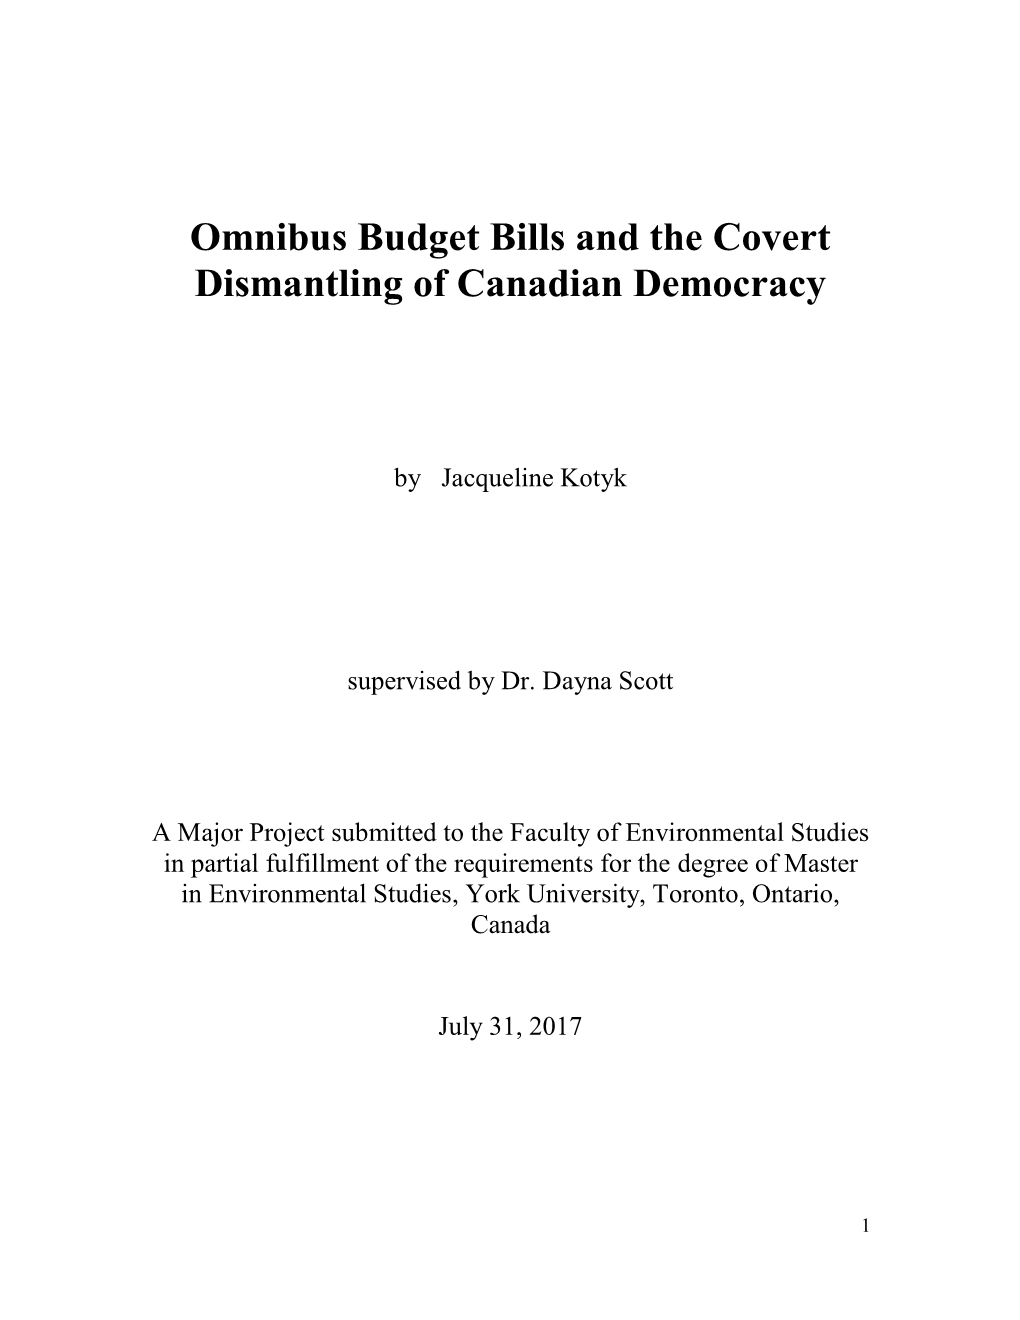 Omnibus Budget Bills and the Covert Dismantling of Canadian Democracy